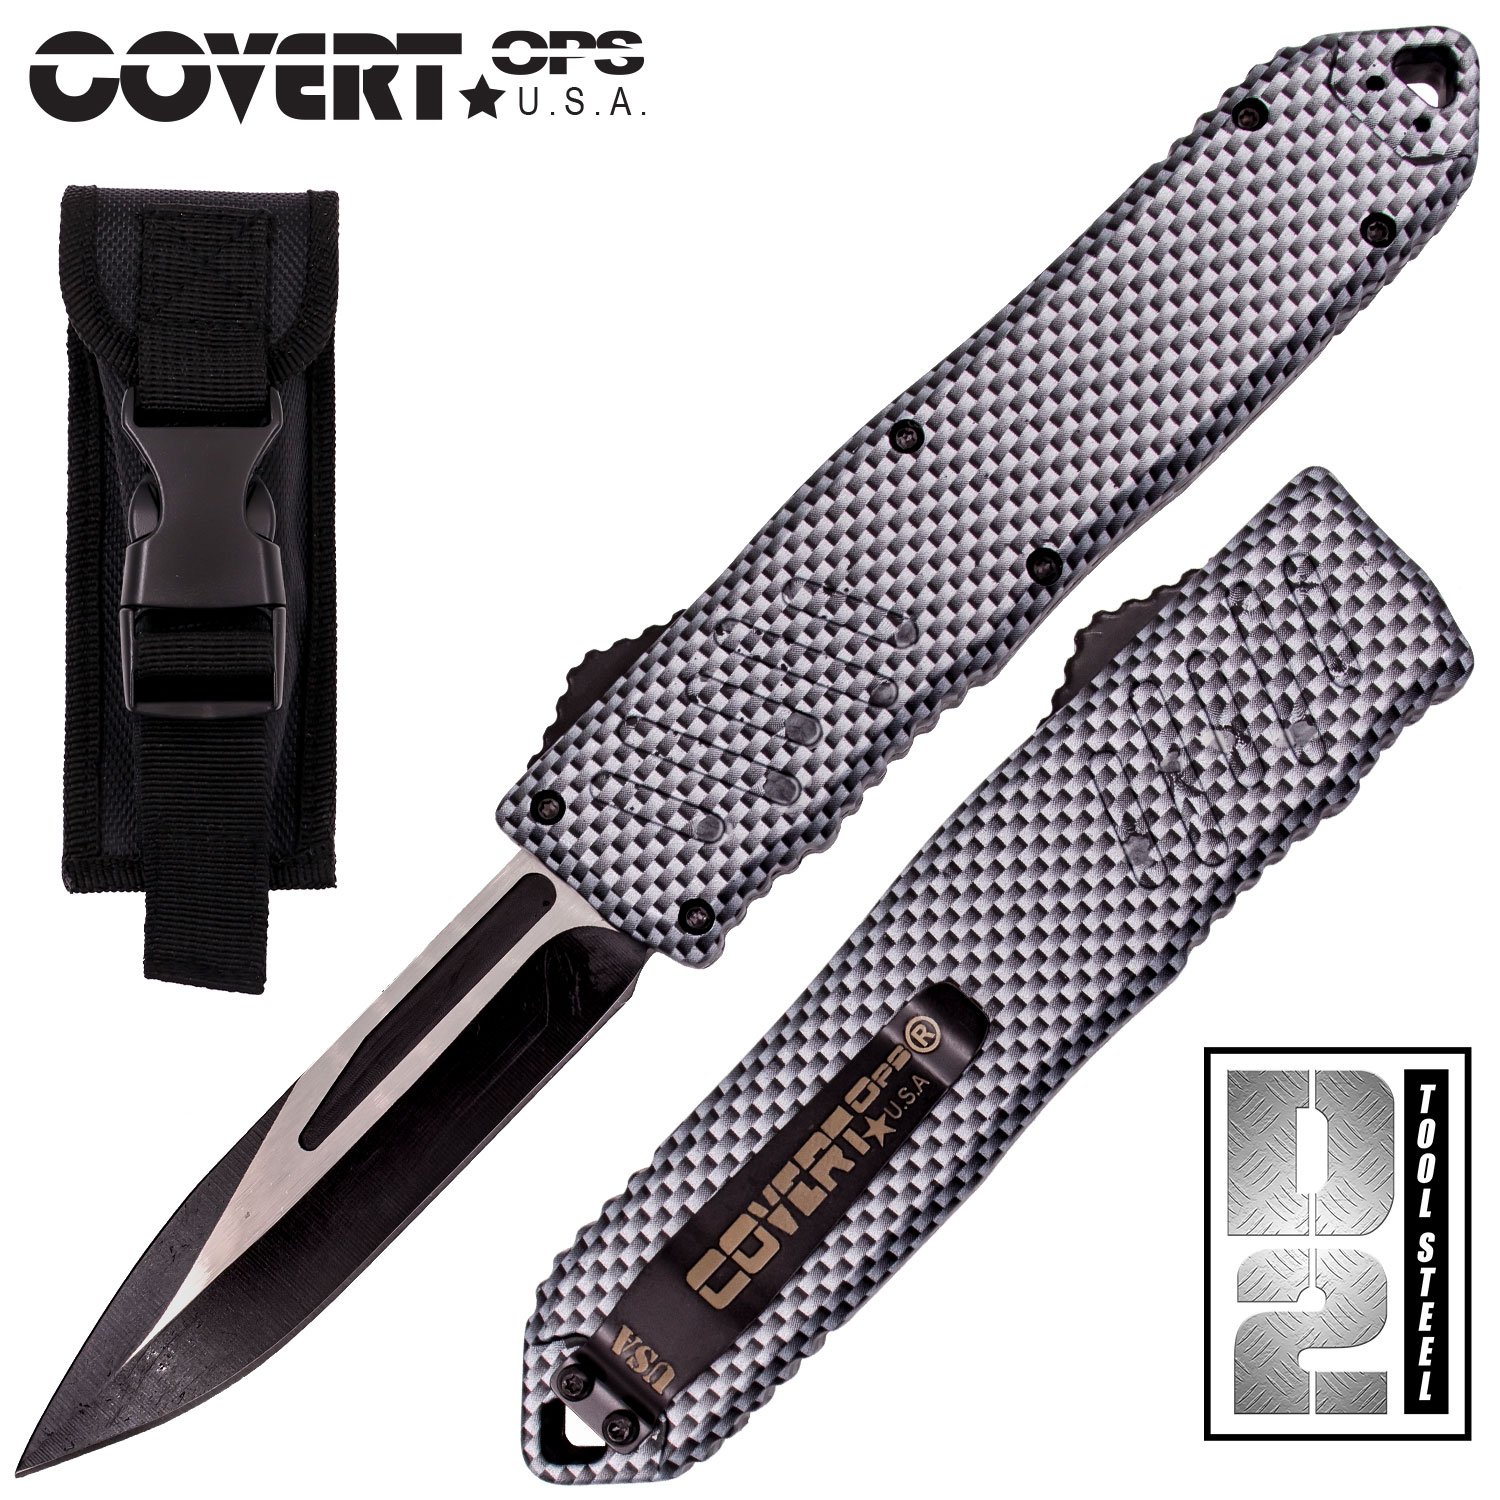 Covert OPS USA OTF Automatic Knife 9 inch Overall D2 Steel Blade DP Carbon Fiber